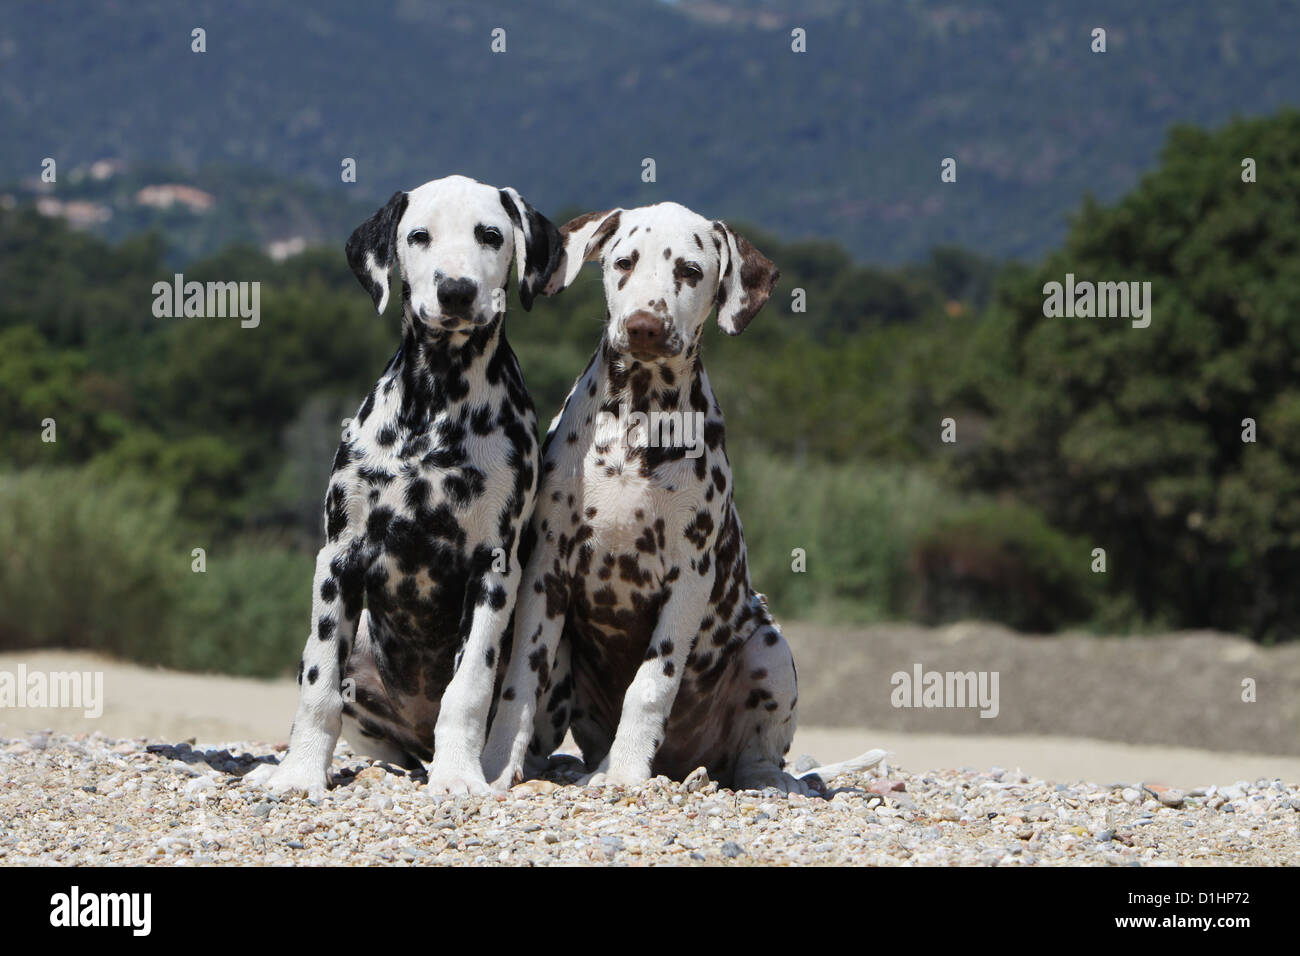 Dog Dalmatian / Dalmatiner / Dalmatien two puppies different colors sitting on the beach Stock Photo